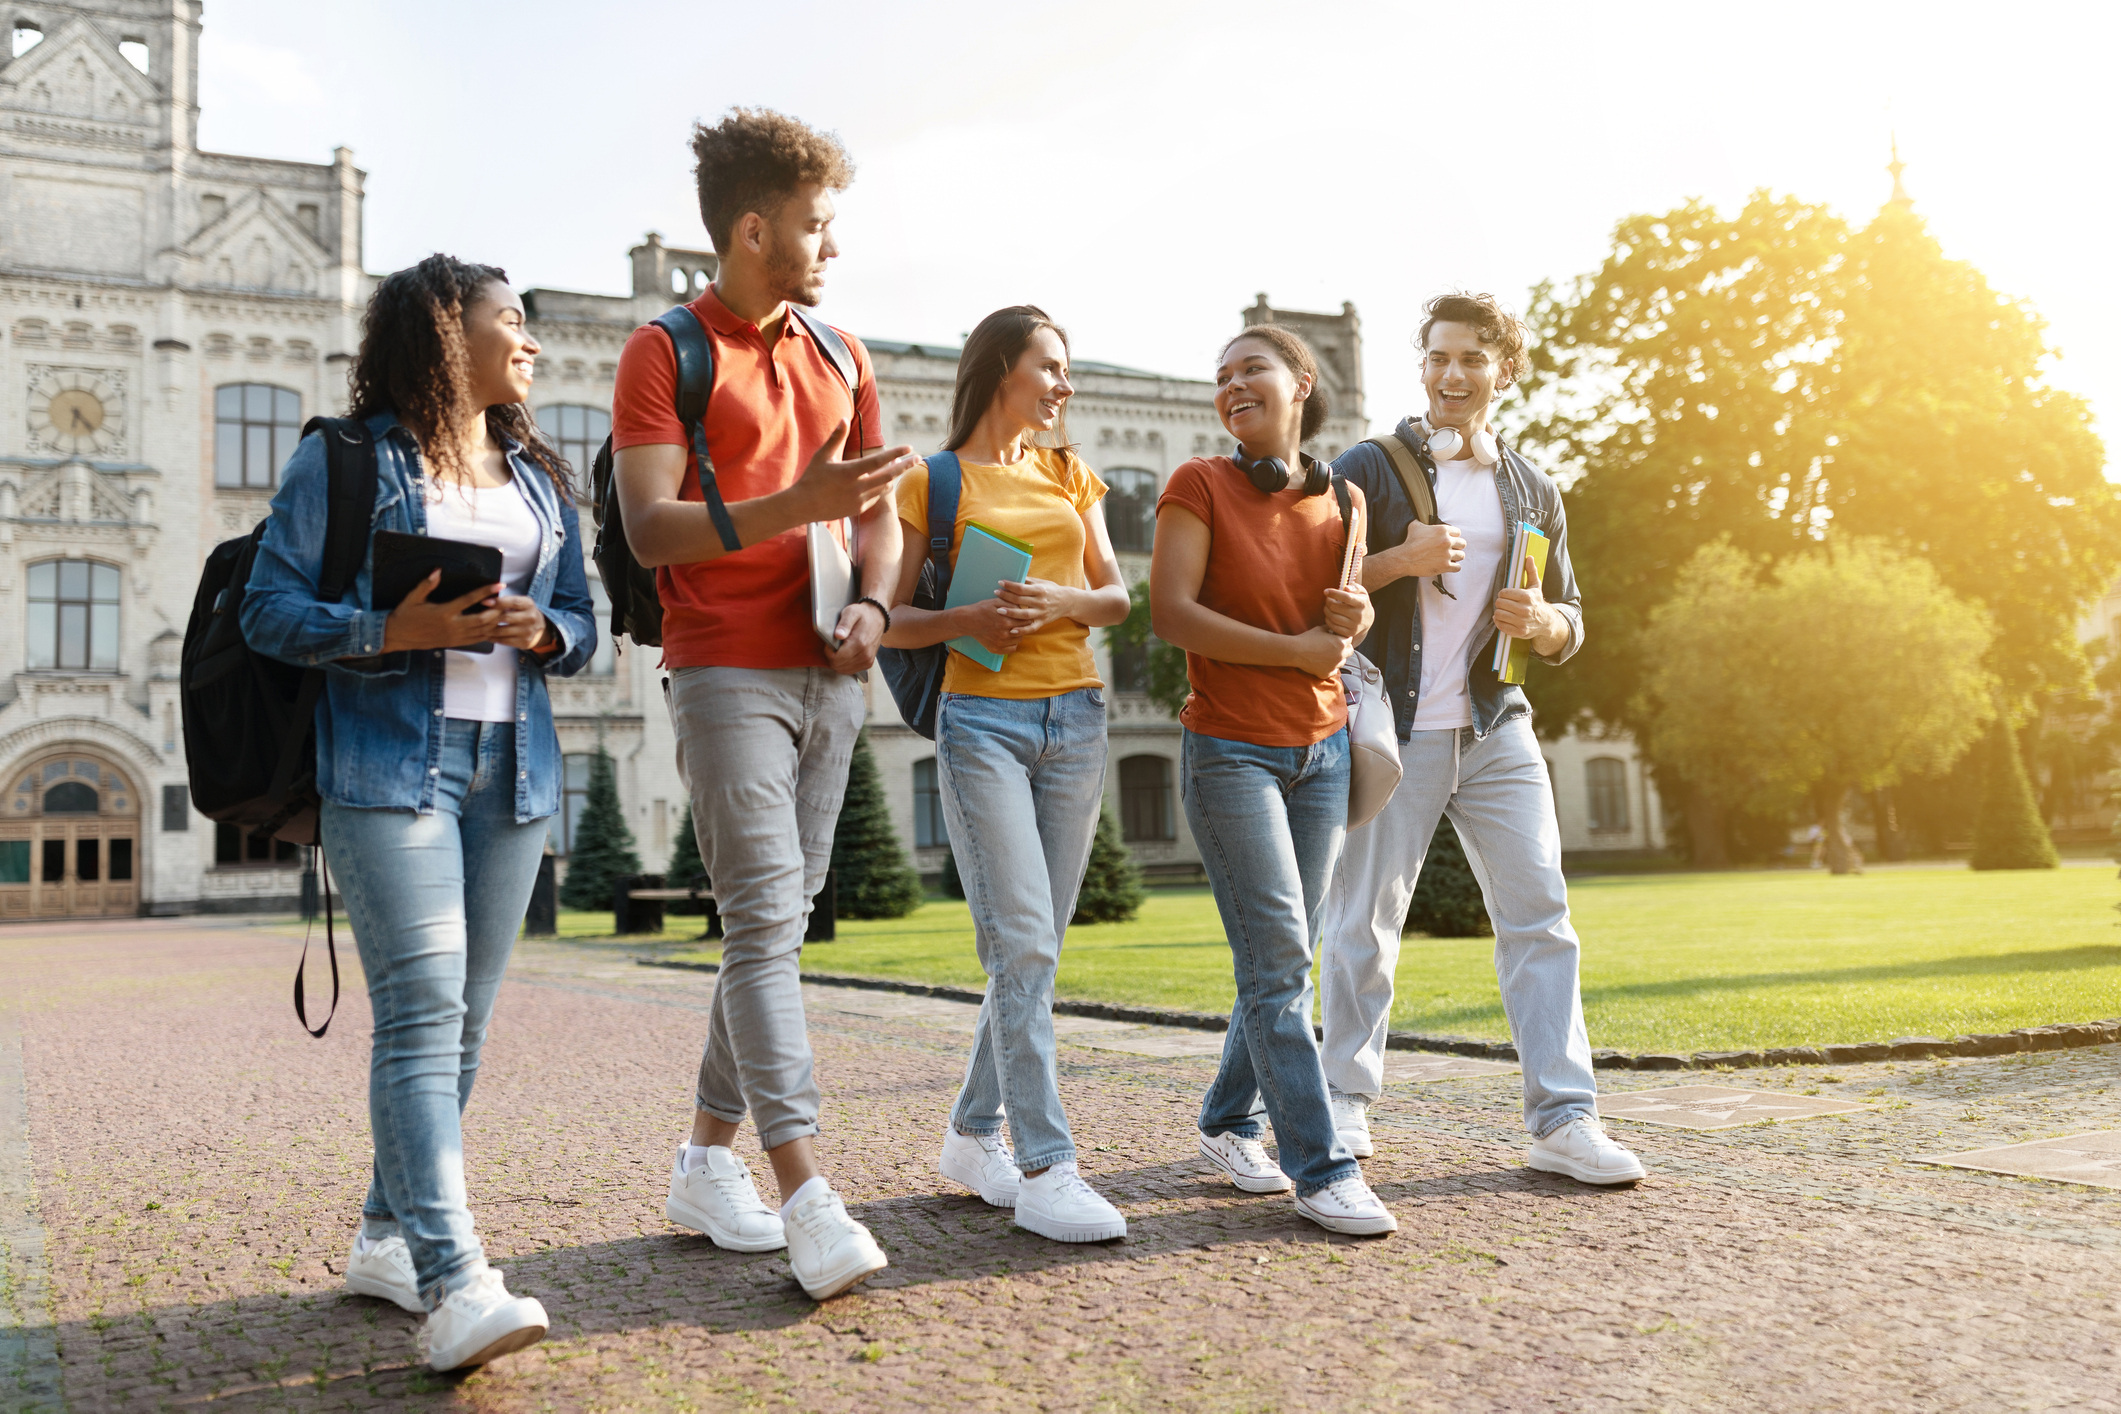 How Omnichannel Marketing Can Help Boost College Enrollment